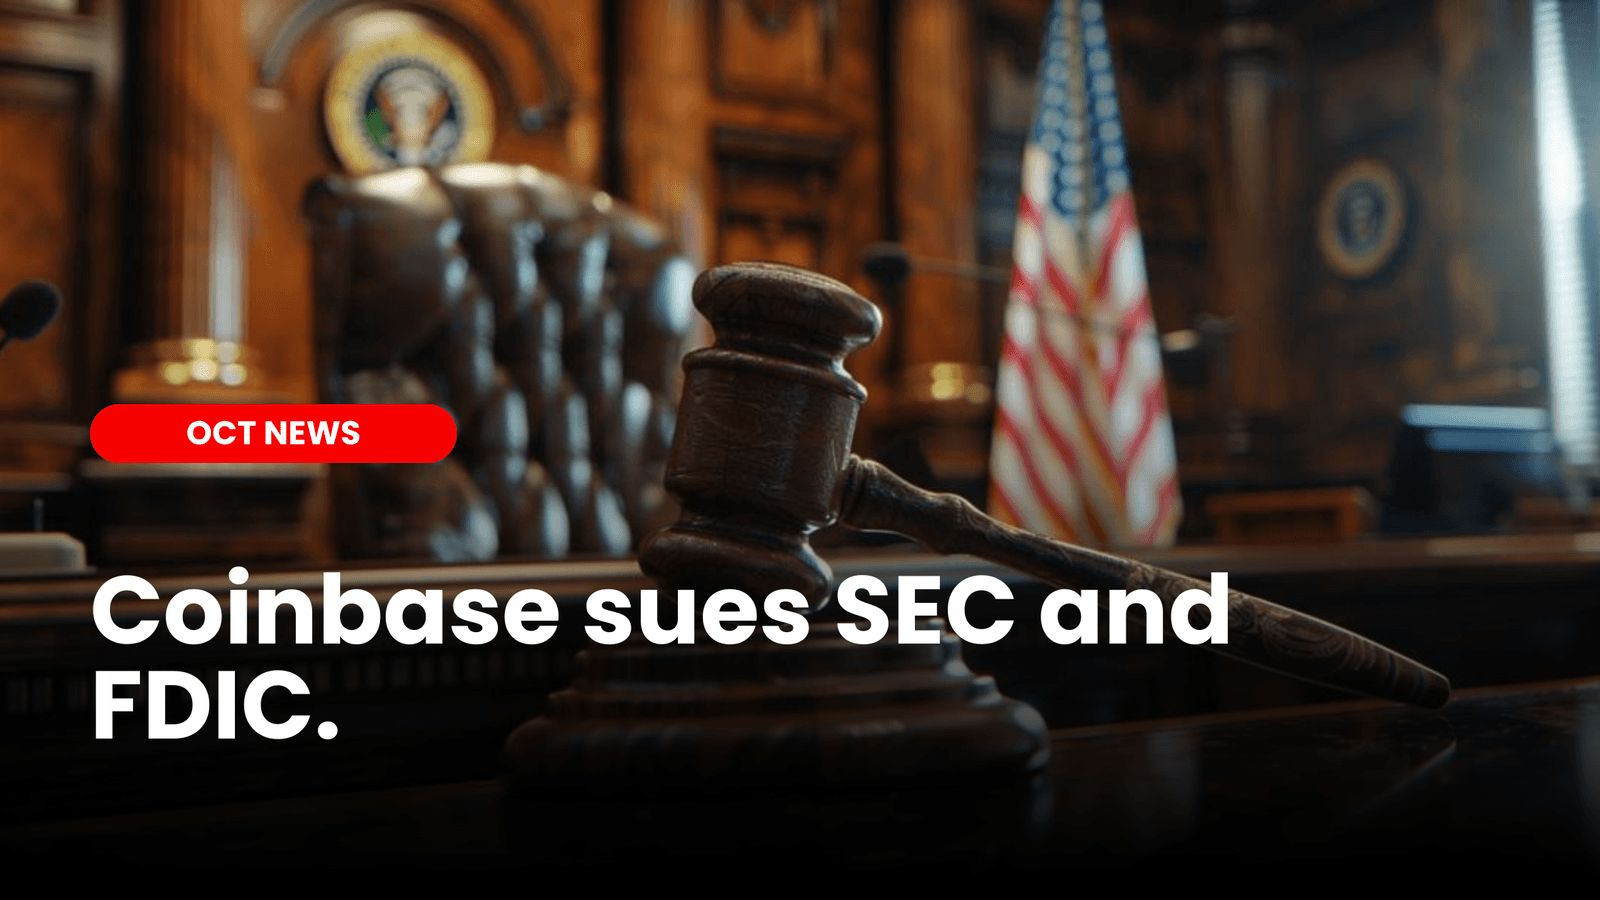 Coinbase sues the SEC and FDIC image